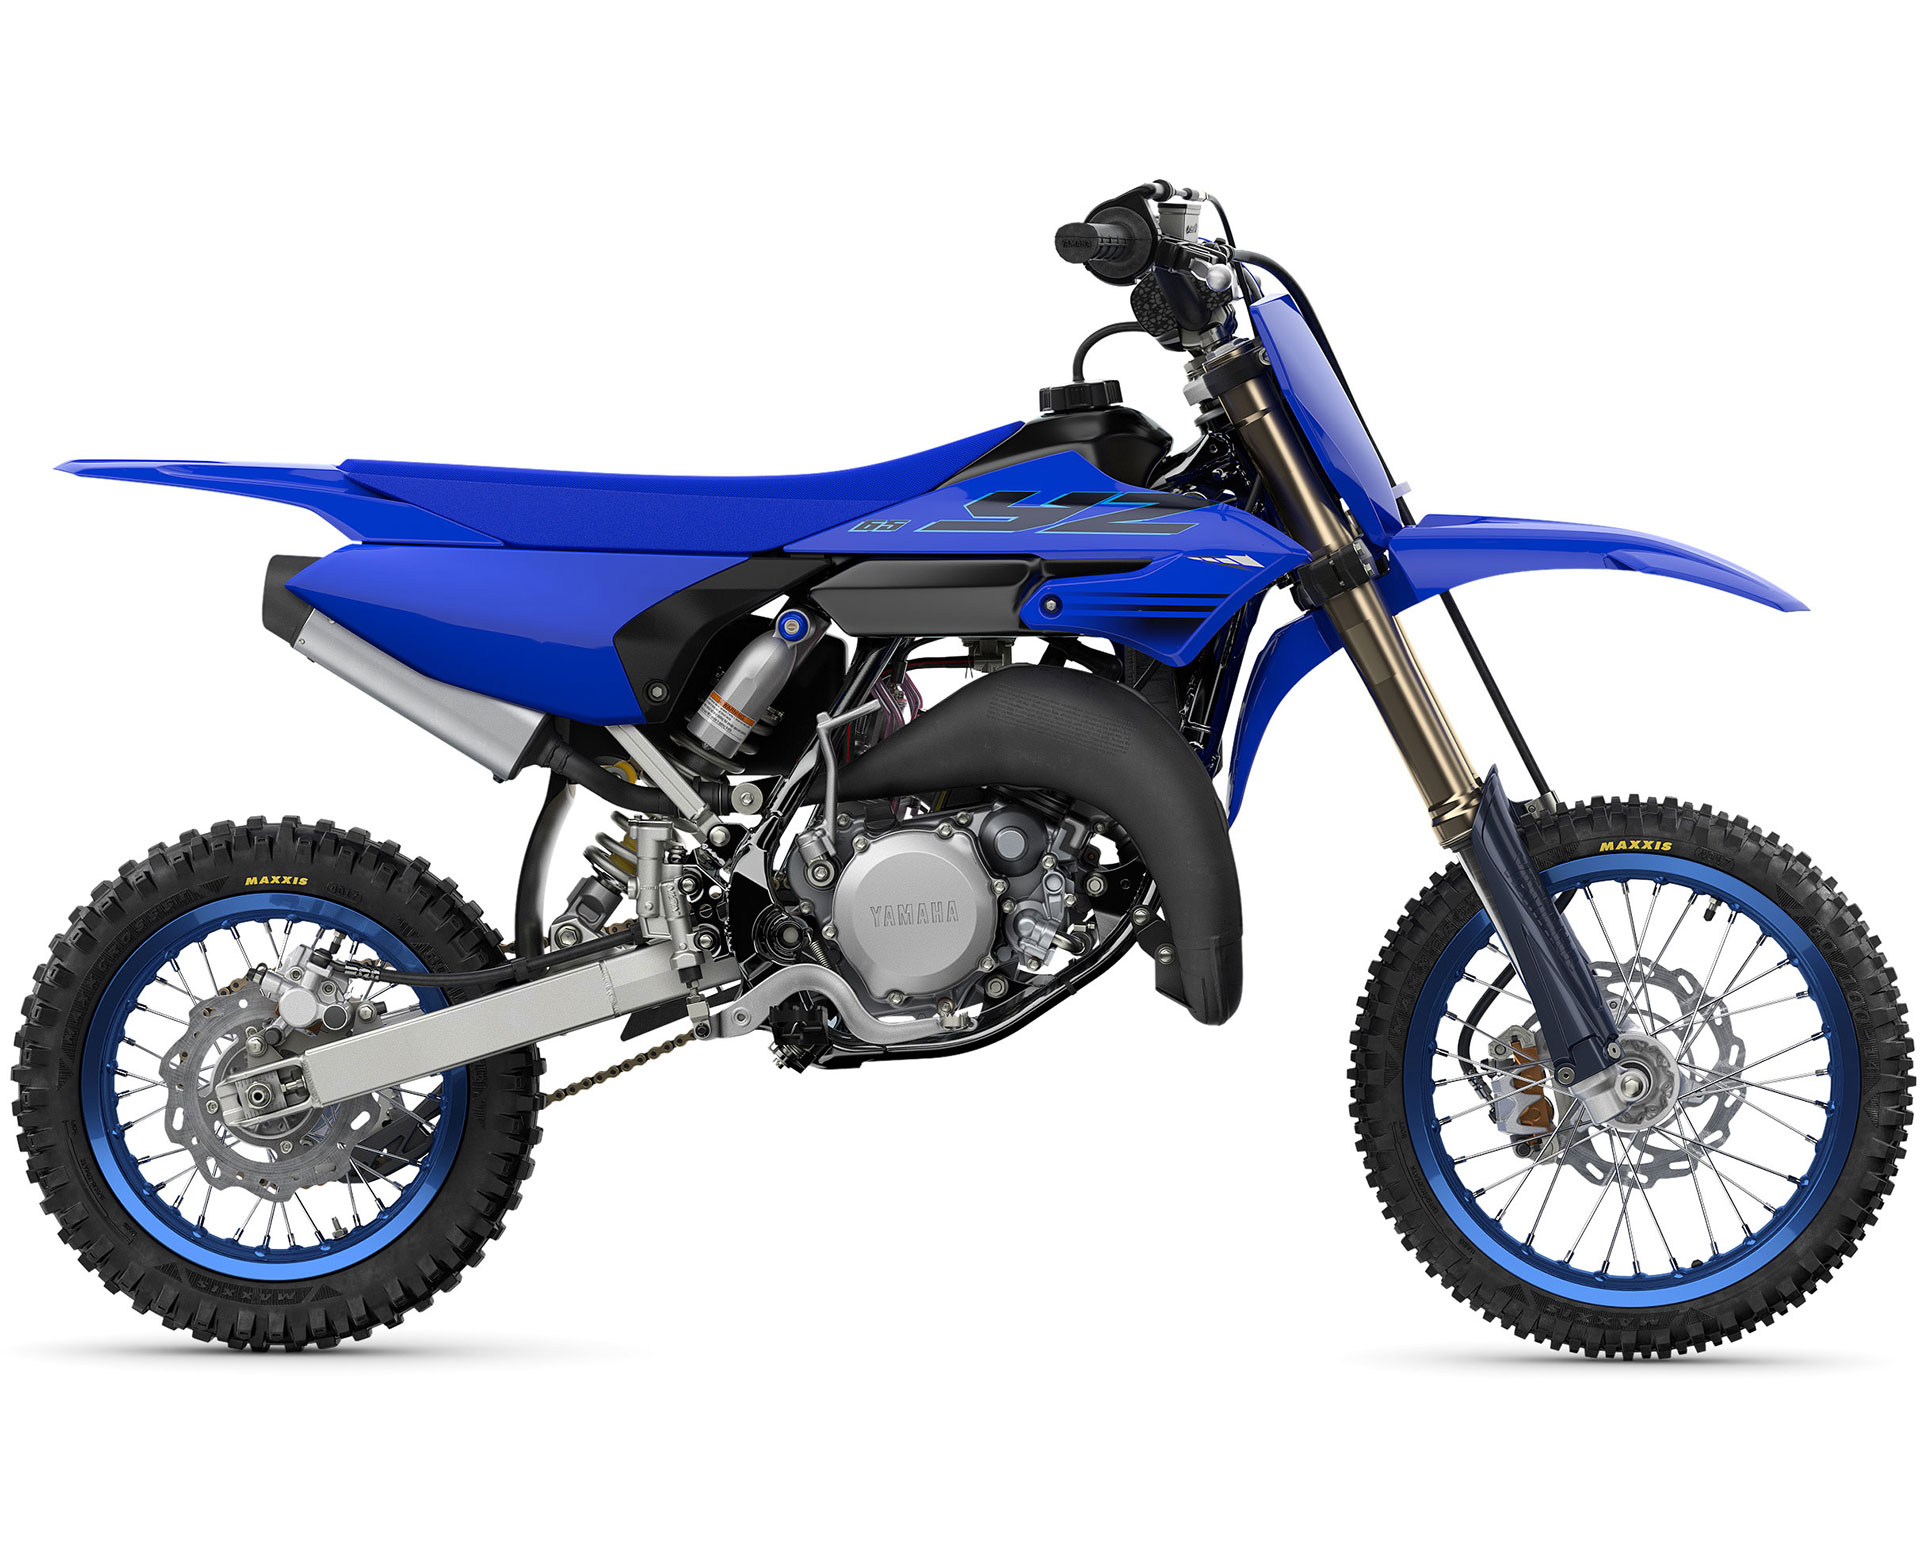 Thumbnail of your customized YZ65 2024